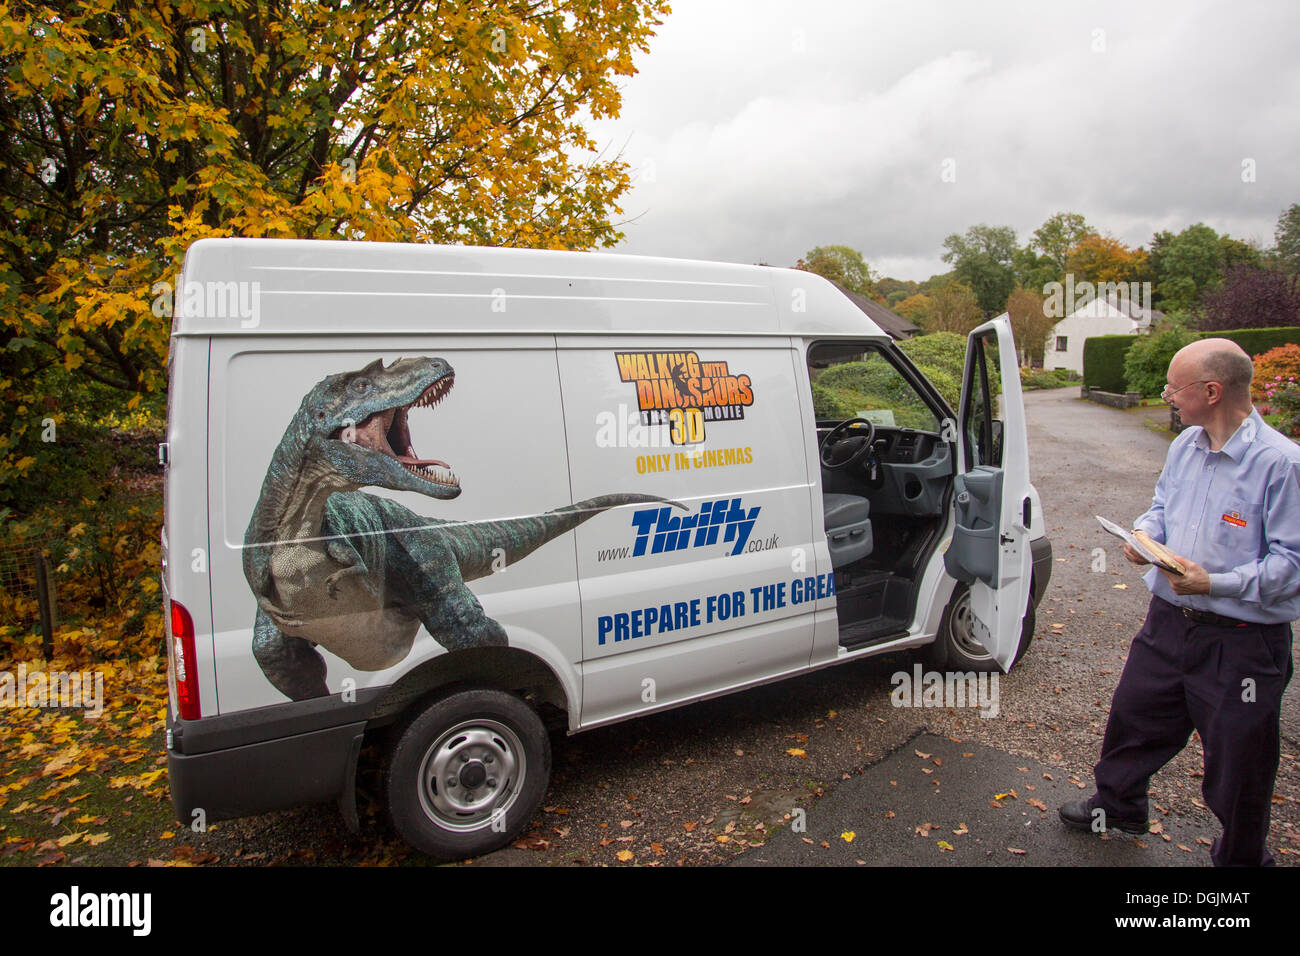 Cumbria, UK. 22nd Oct, 2013. Royal Mail newly privatised using rental van with advertisements instead of traditional red van. Credit:  Shoosmith Collection/Alamy Live News Stock Photo